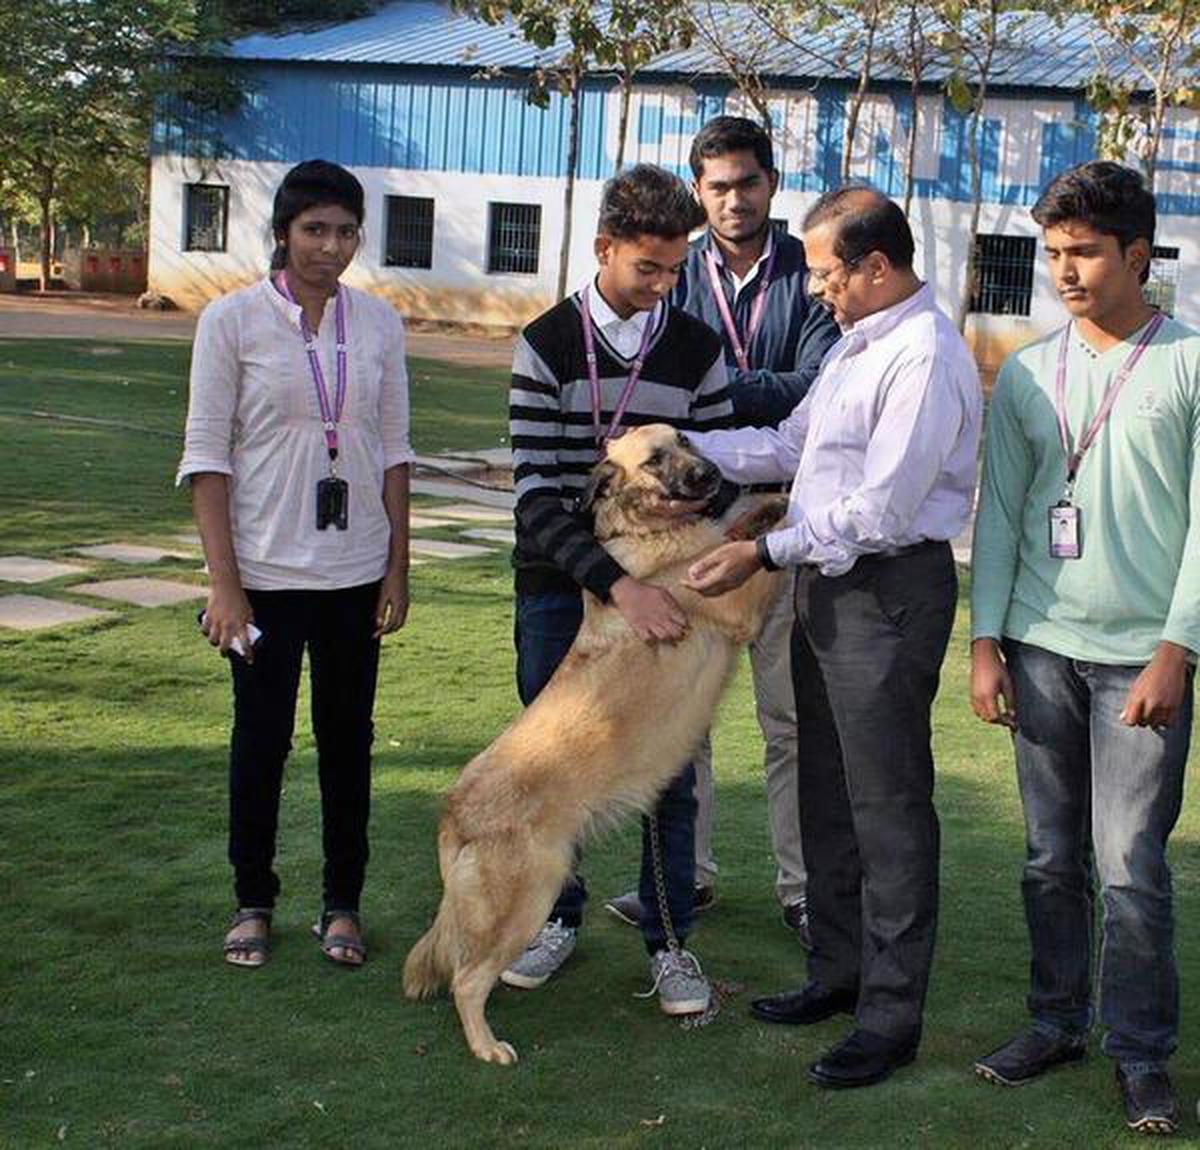 This college welcomes stray animals and birds - The Hindu